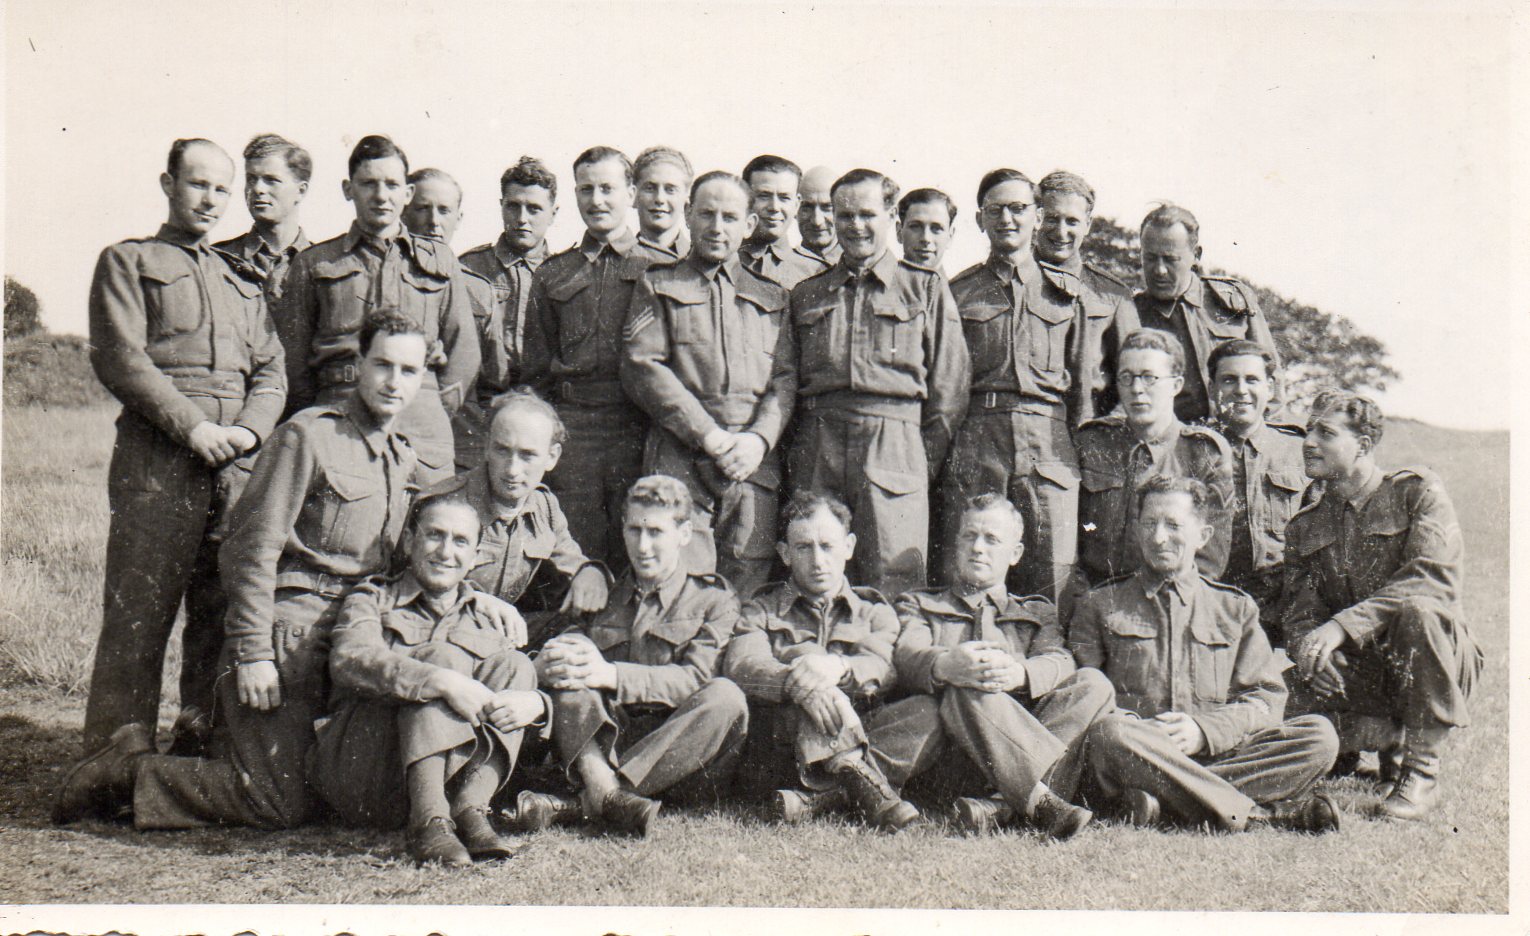 Kitchener camp, army photograph, 1939/40 Will Reissner is standing on the far left, back row Submitted by Vivien Harris for her father, Willi Reissner